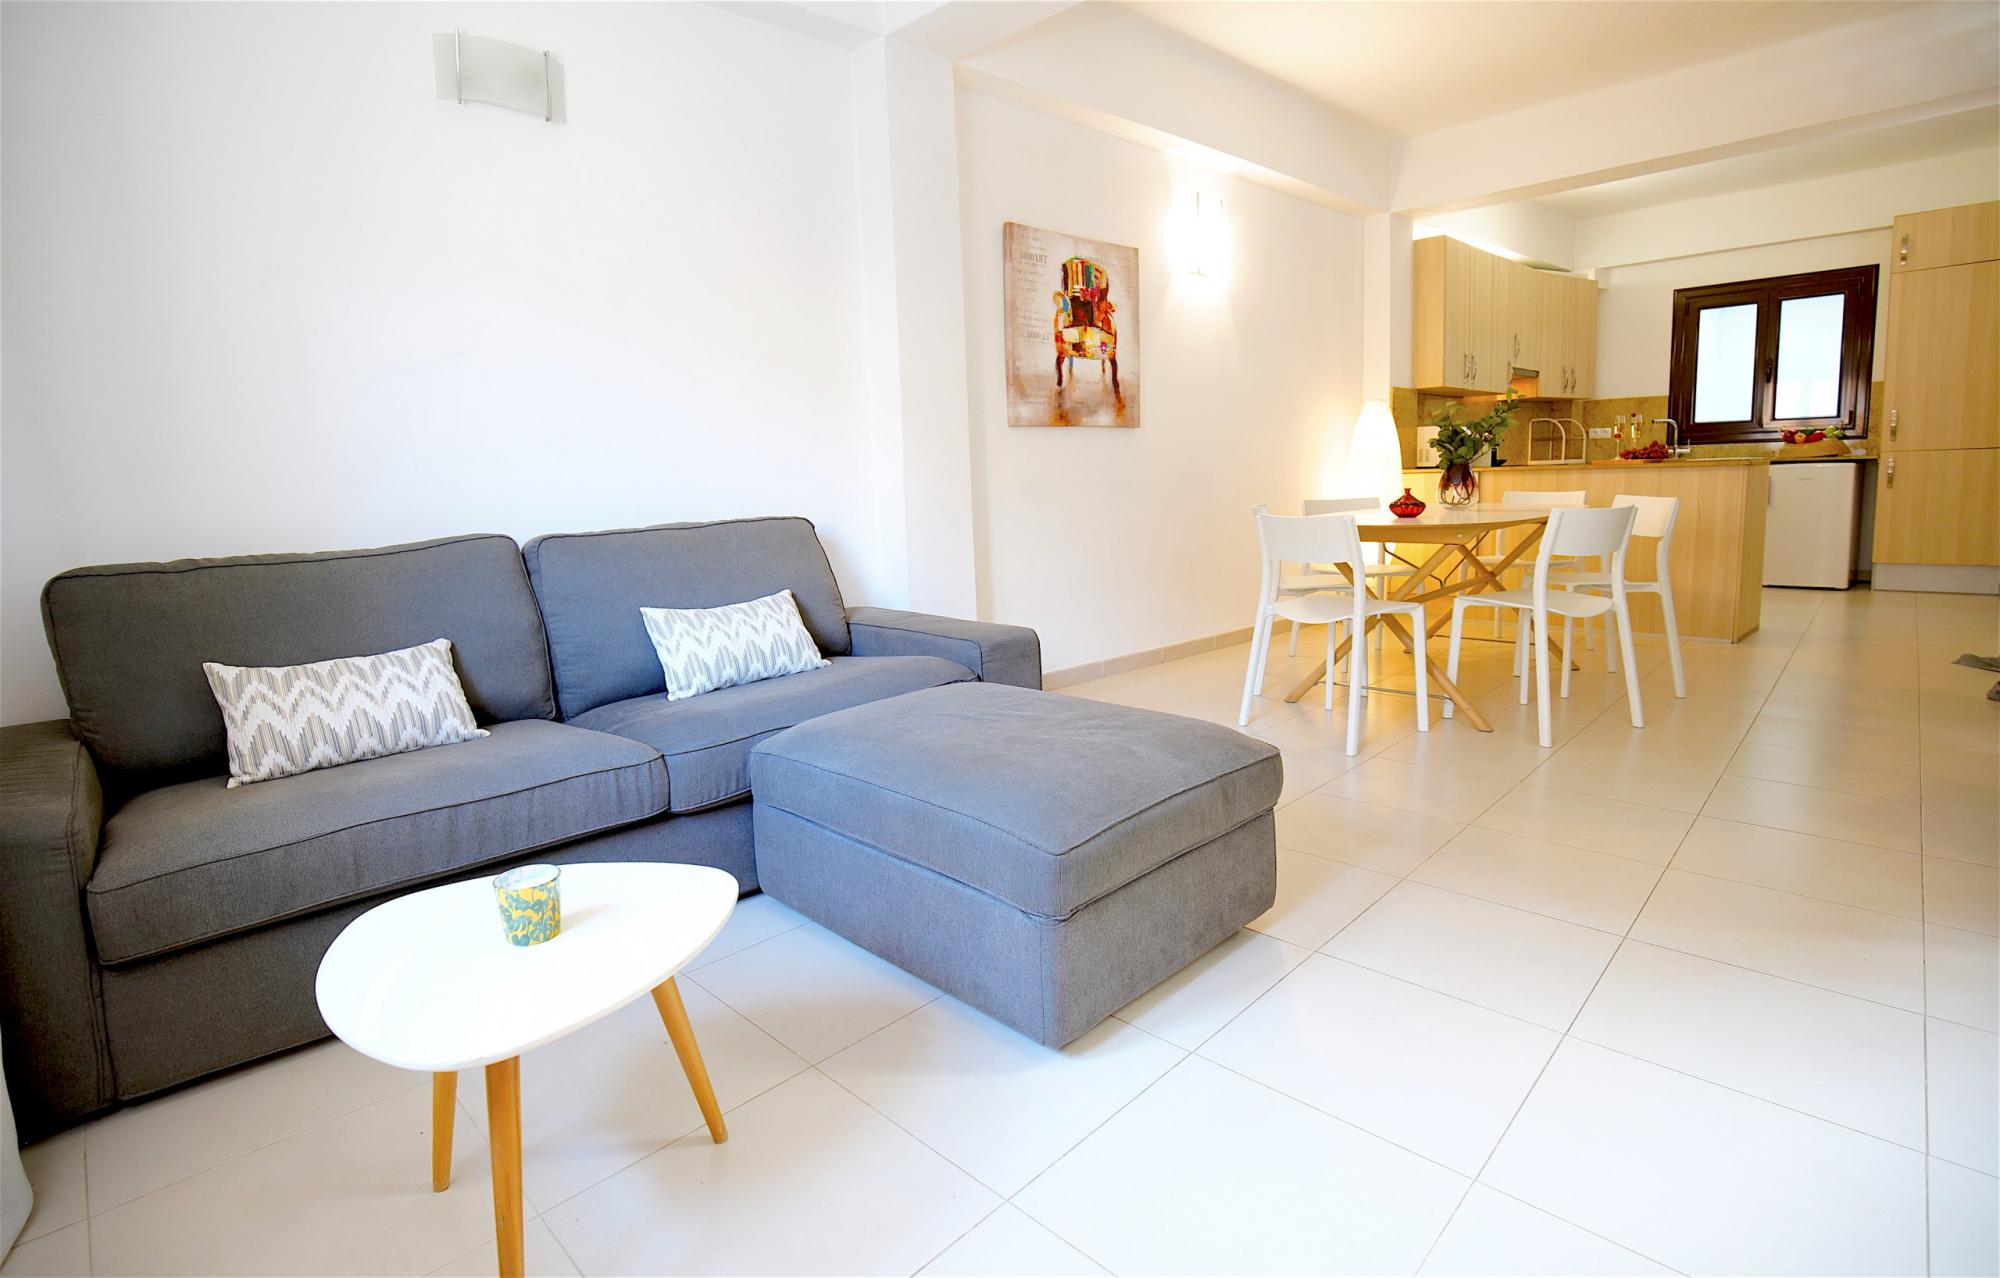 Property Image 2 - Contemporary Bright 3 Bedroom Apartment near Historical Places